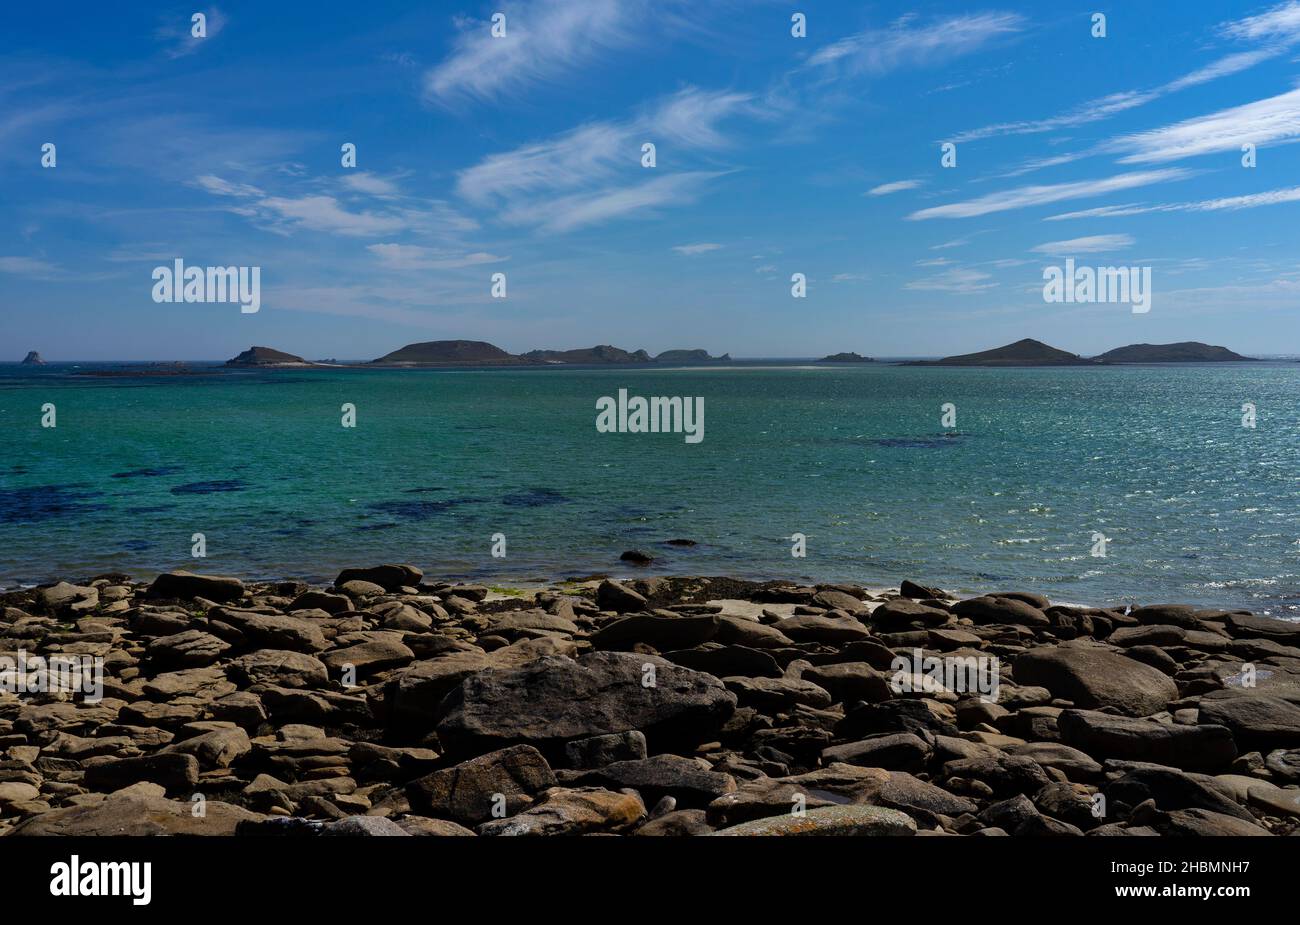 St.Martins, Isole di Scilly, Inghilterra Foto Stock